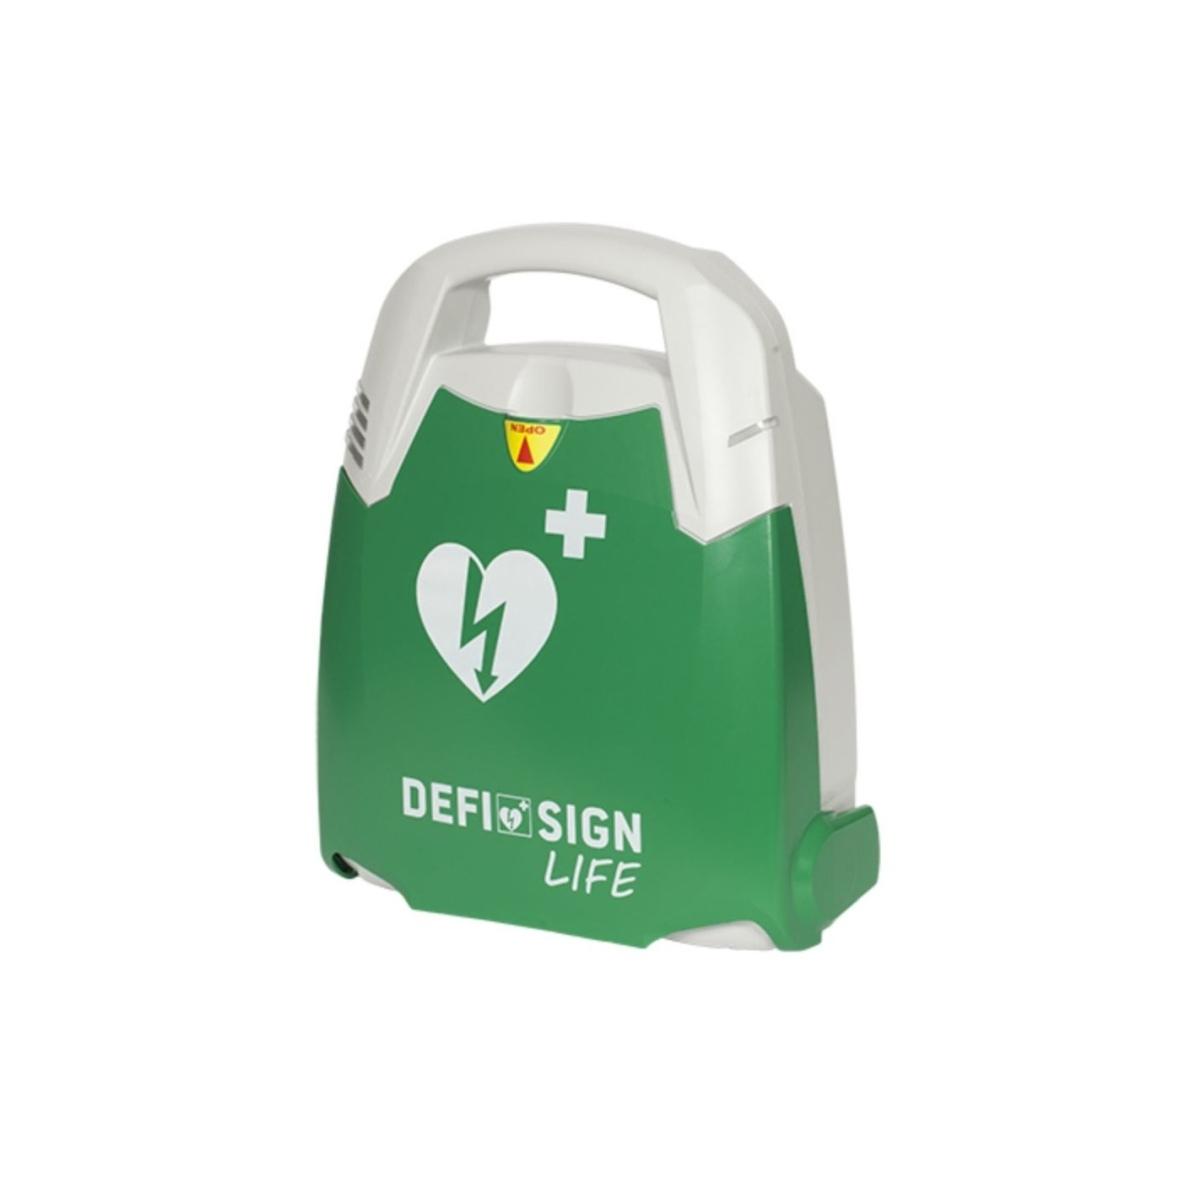 DefiSign LIFE AED - Automatico